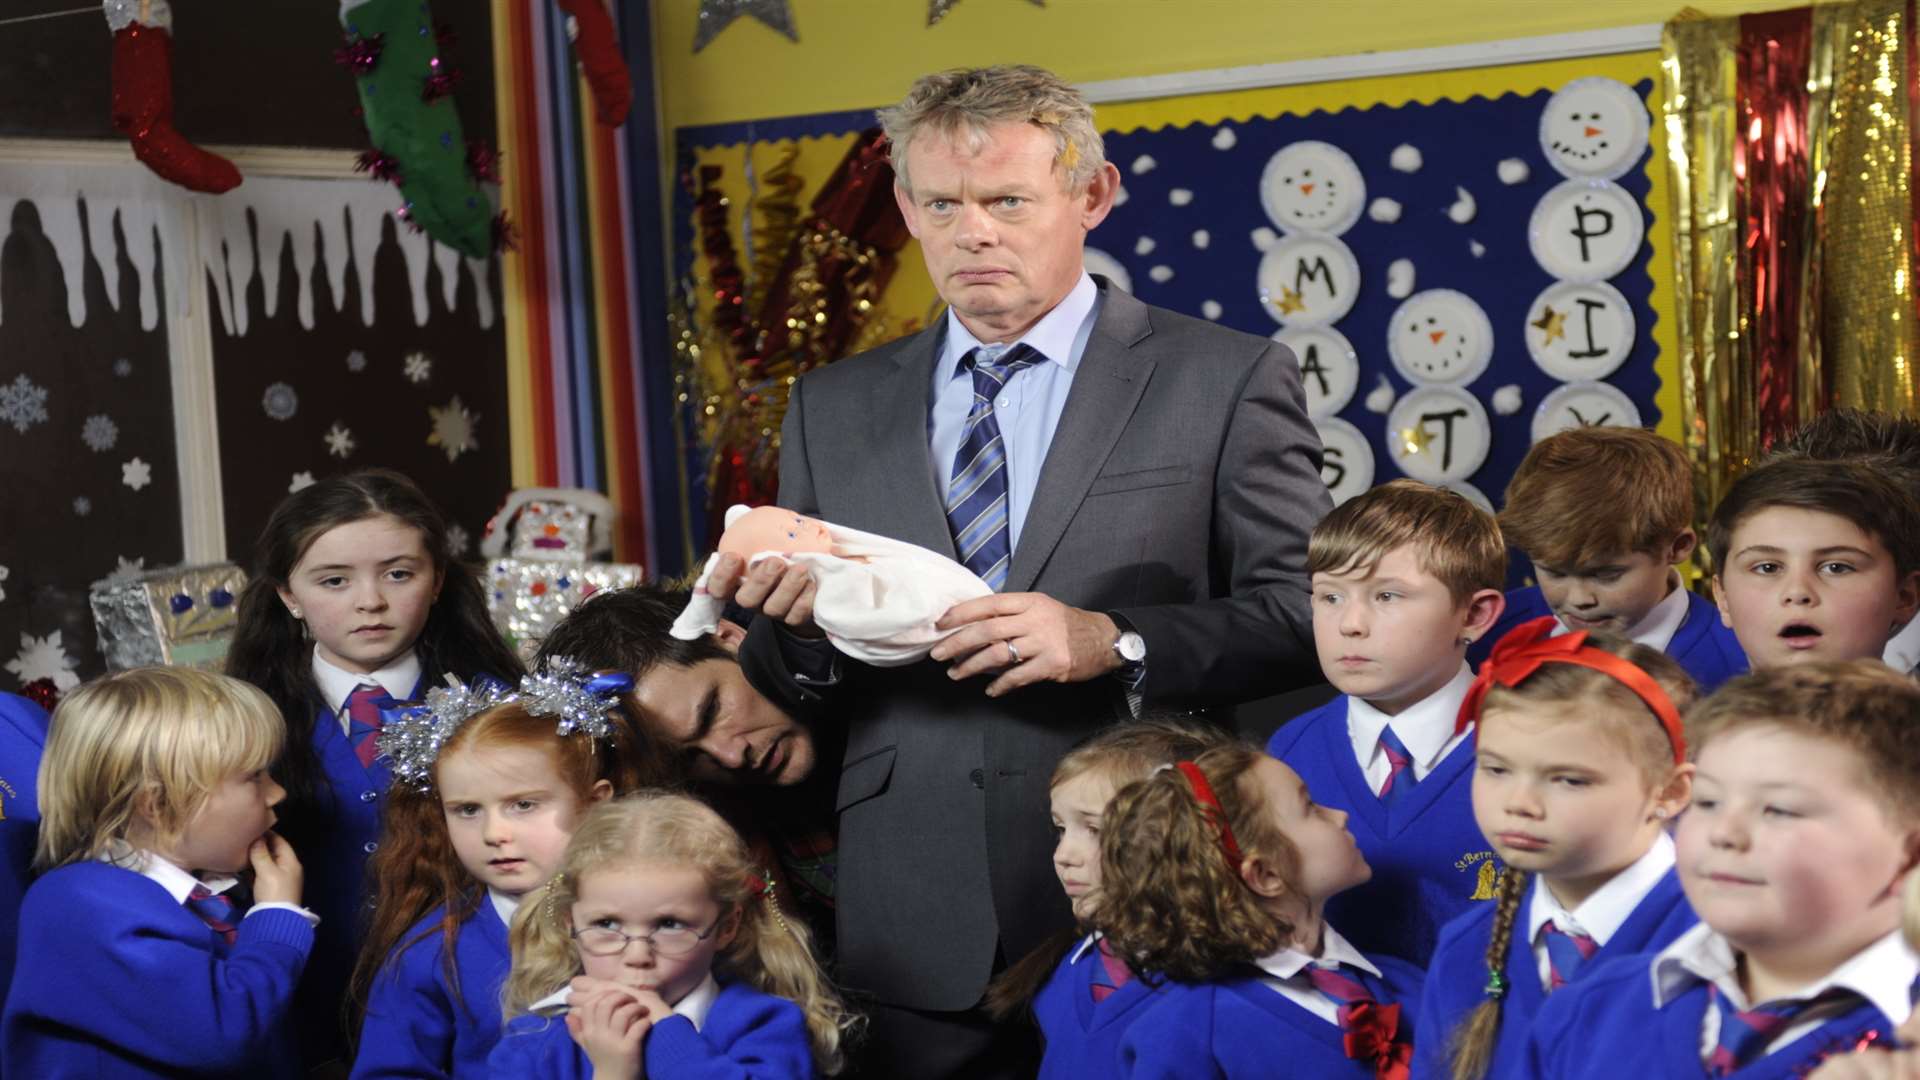 Martin Clunes in Nativity 3: Dude, Wheres My Donkey?! Picture: PA Photo/Handout/Entertainment One